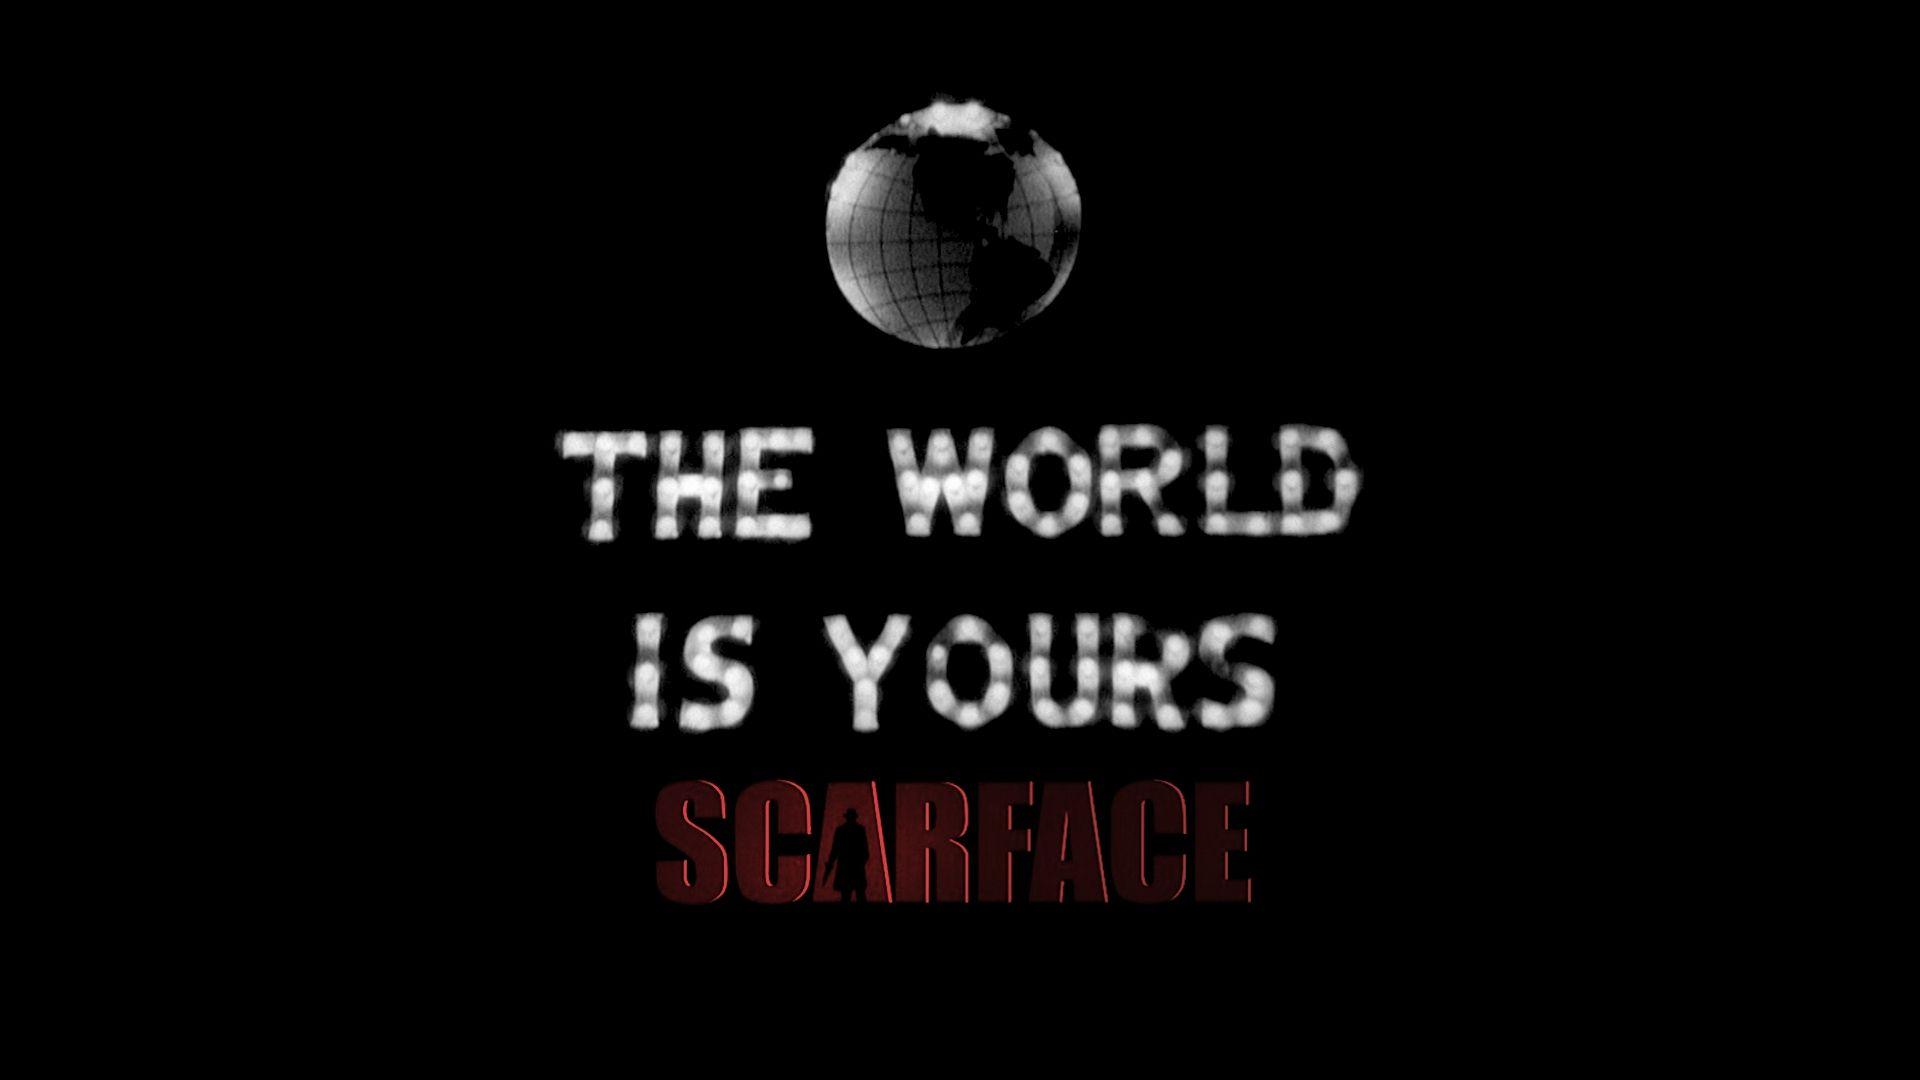 Cool Scarface Wallpapers